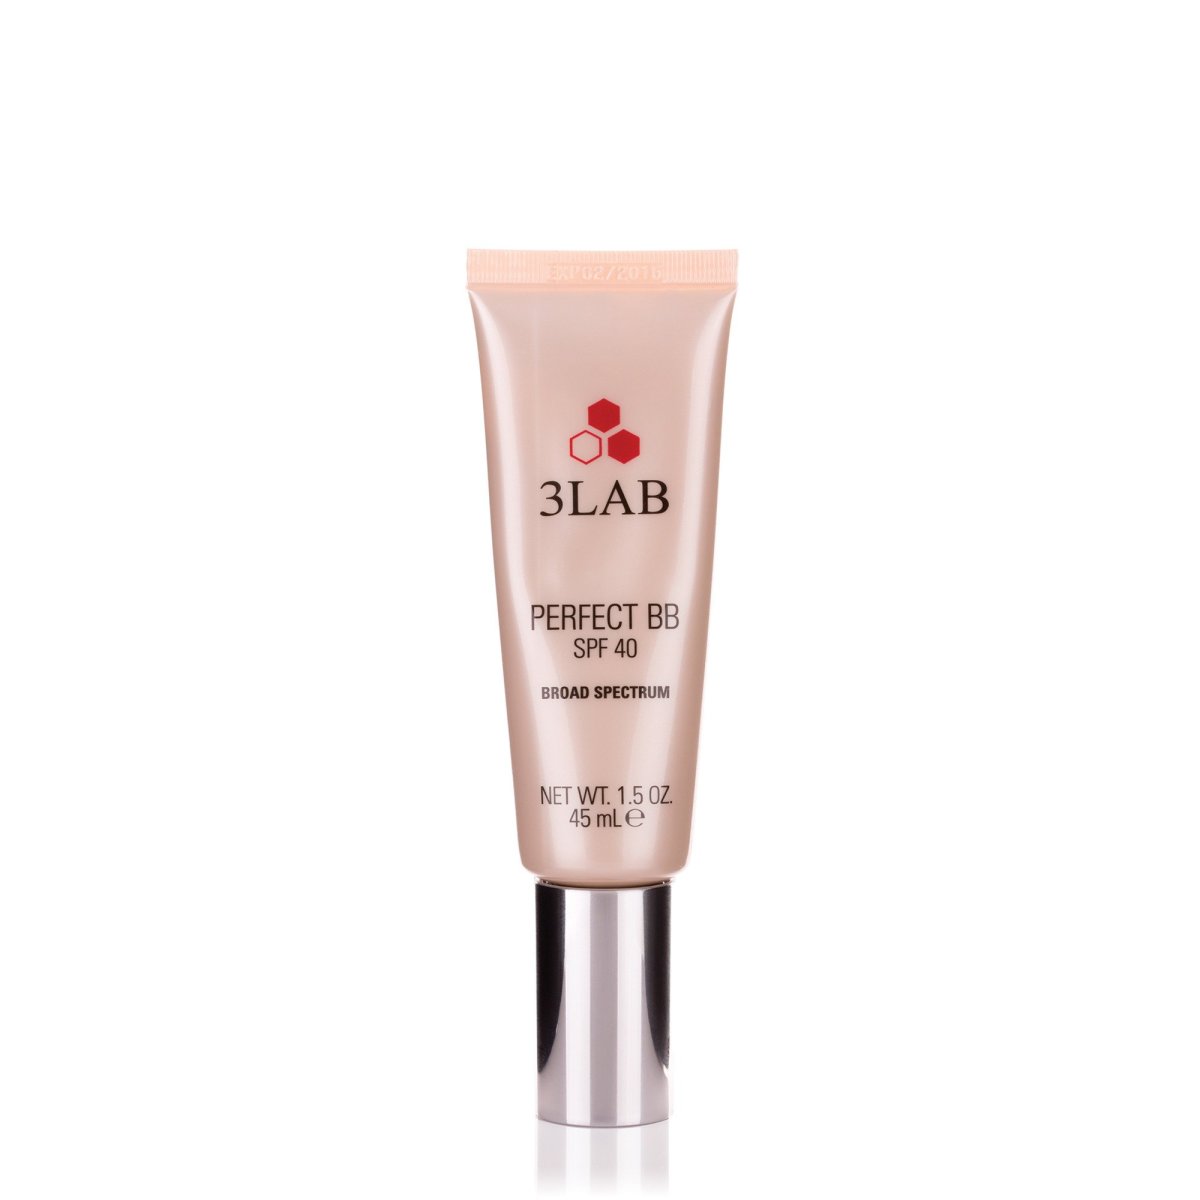 3Lab Perfect BB SPF 40/PA+++, $105, available at Dermstore.